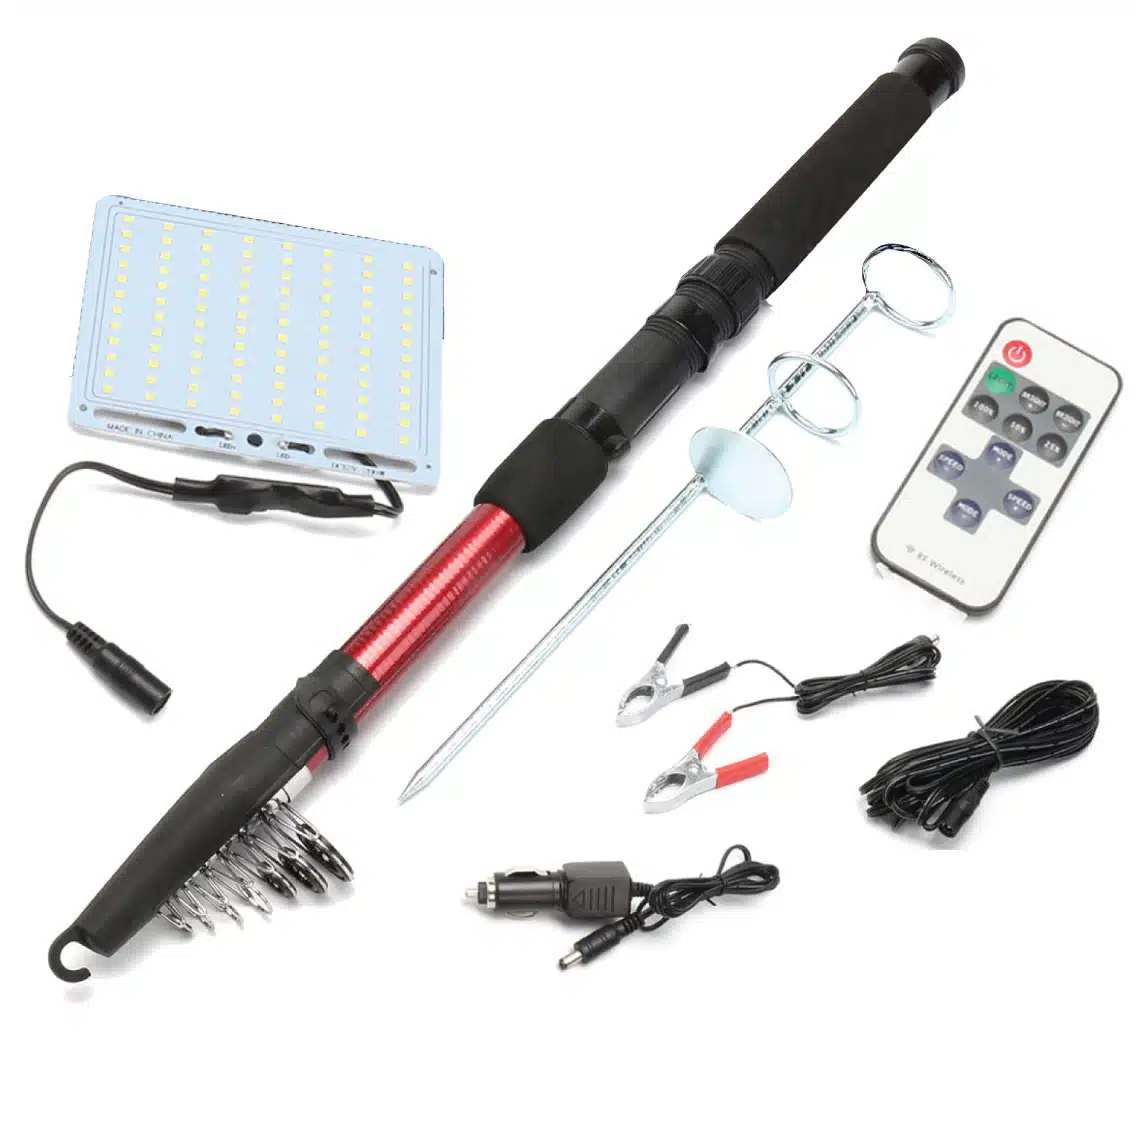 12V LED Camping Lights Meters Telescopic Fishing Pole, 48% OFF